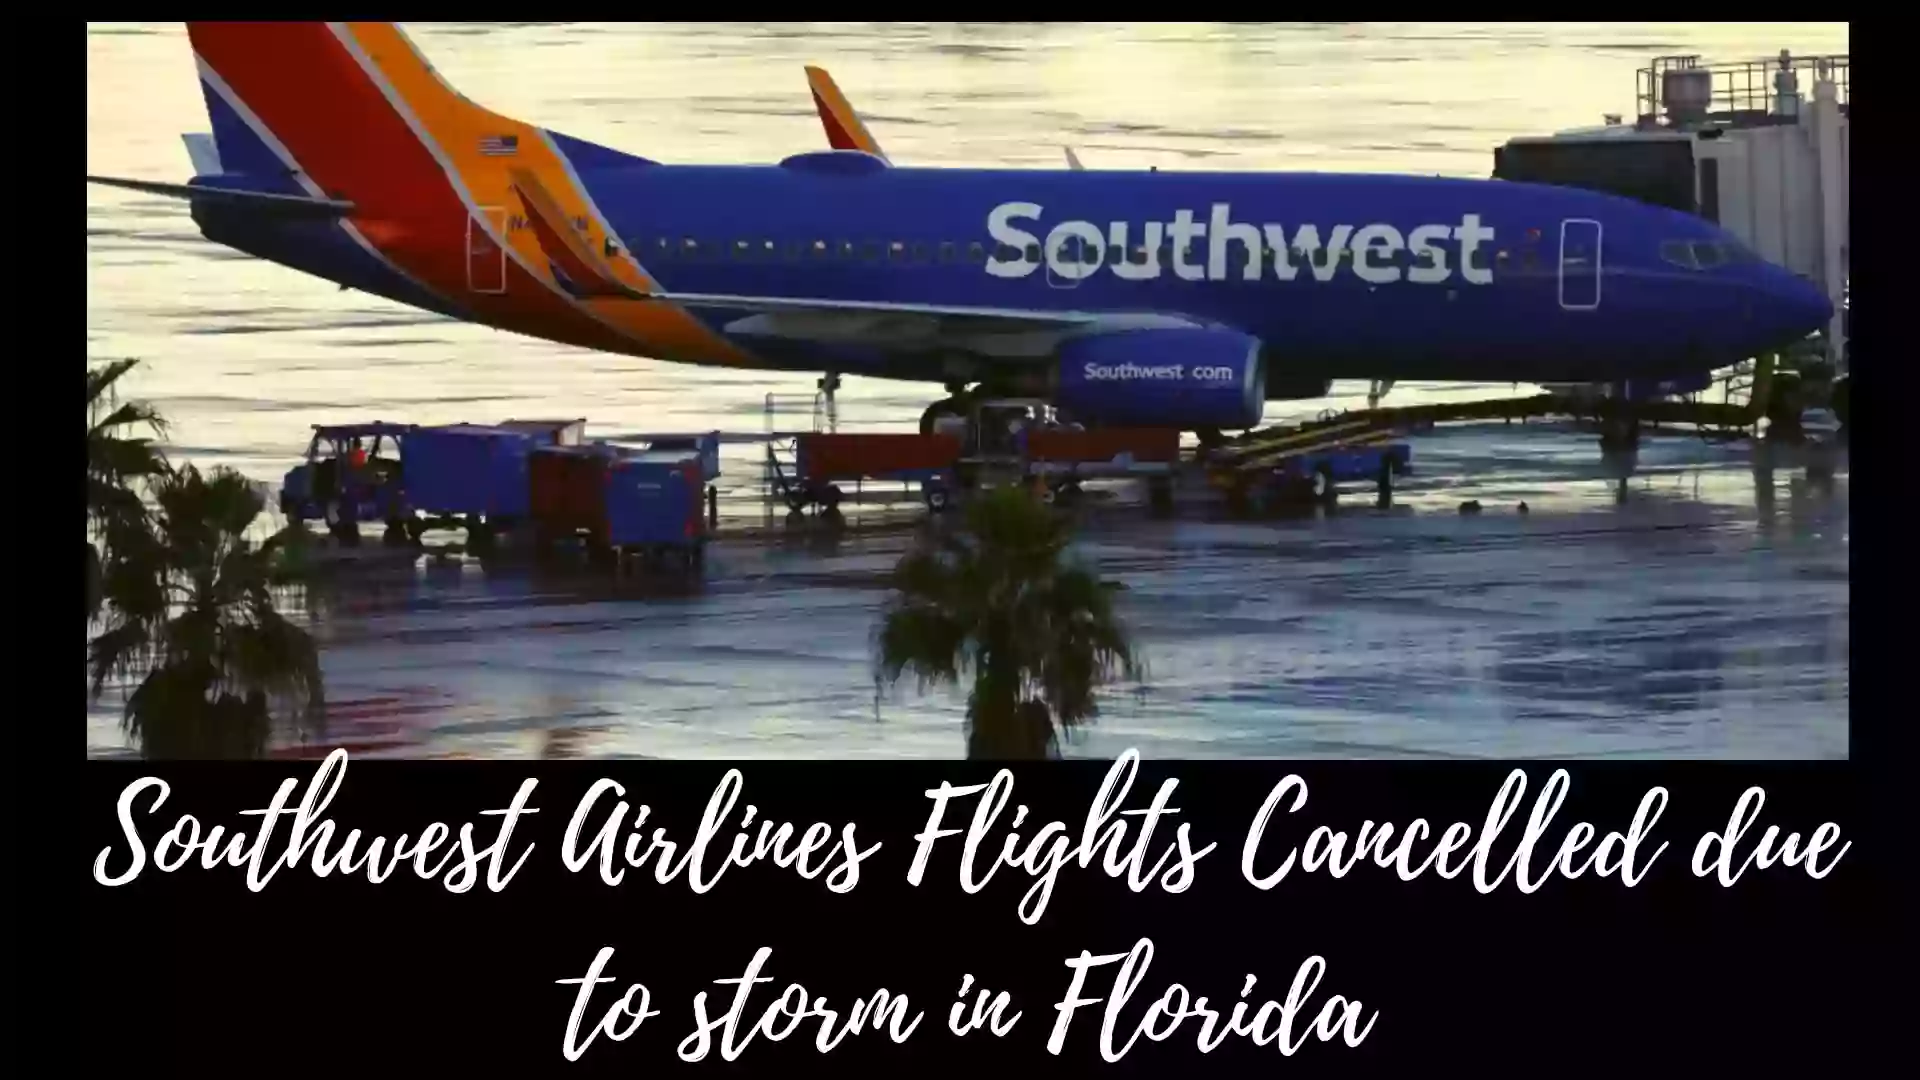 Southwest Airlines Flights Cancelled due to storm in Florida